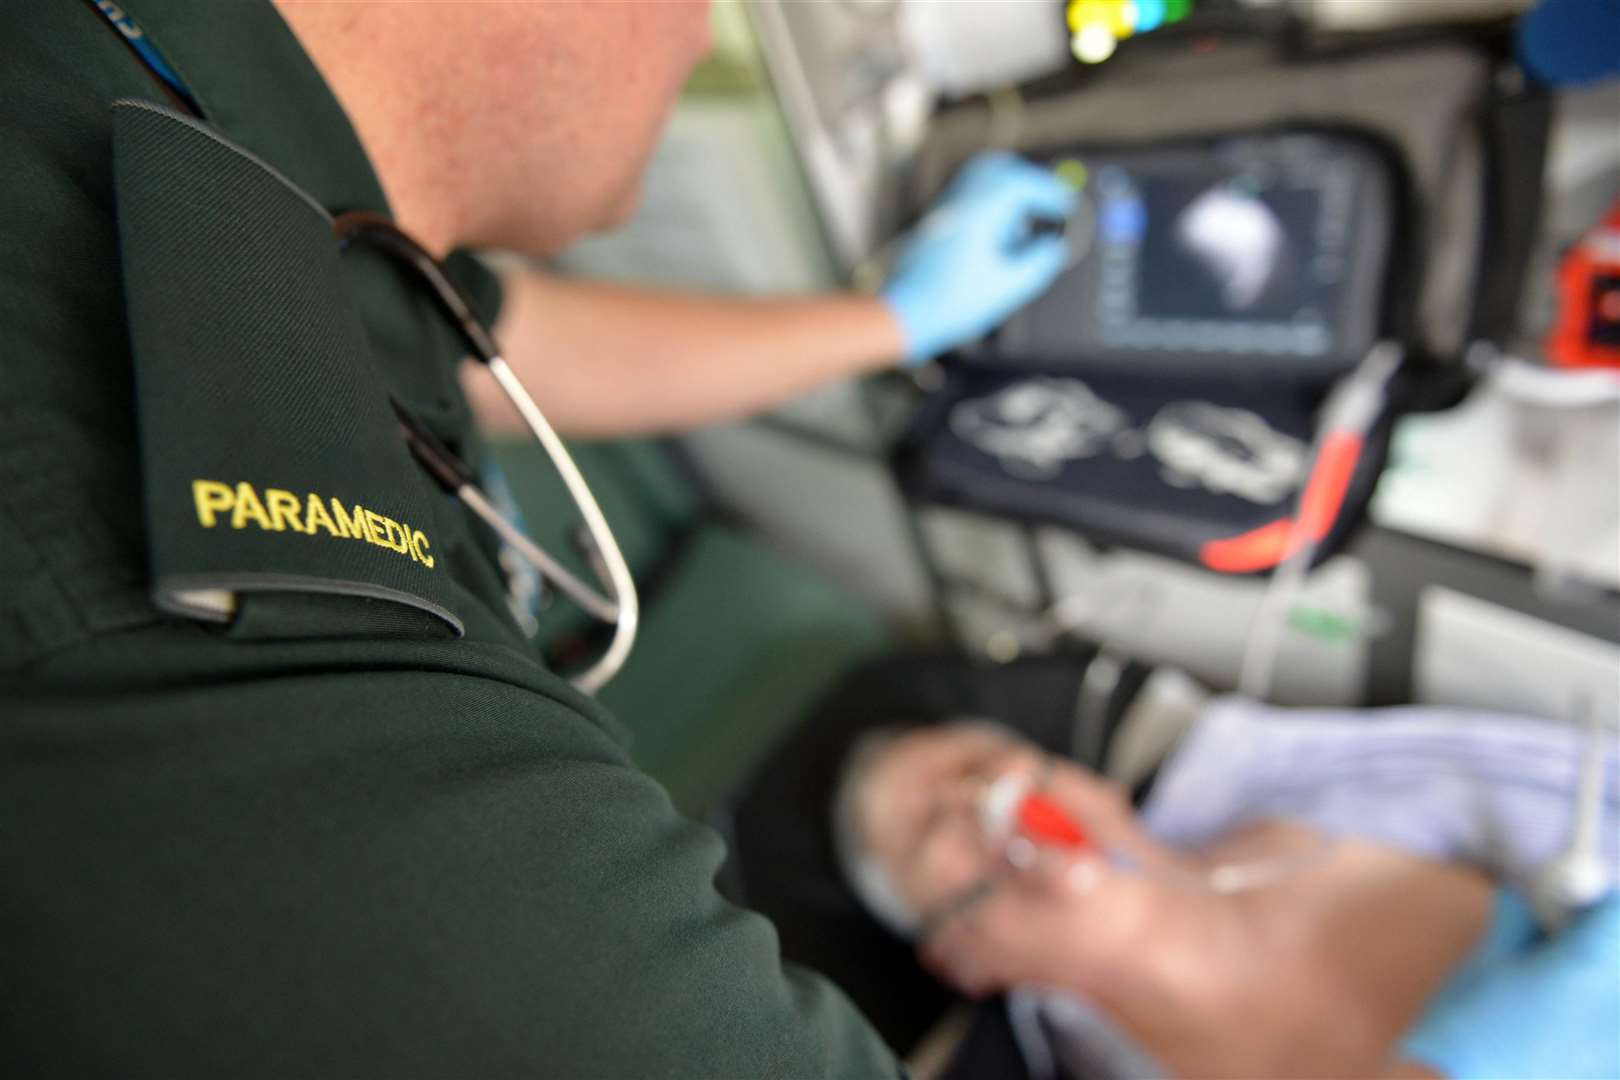 Simon Trafford was working as a paramedic at the time. Stock image